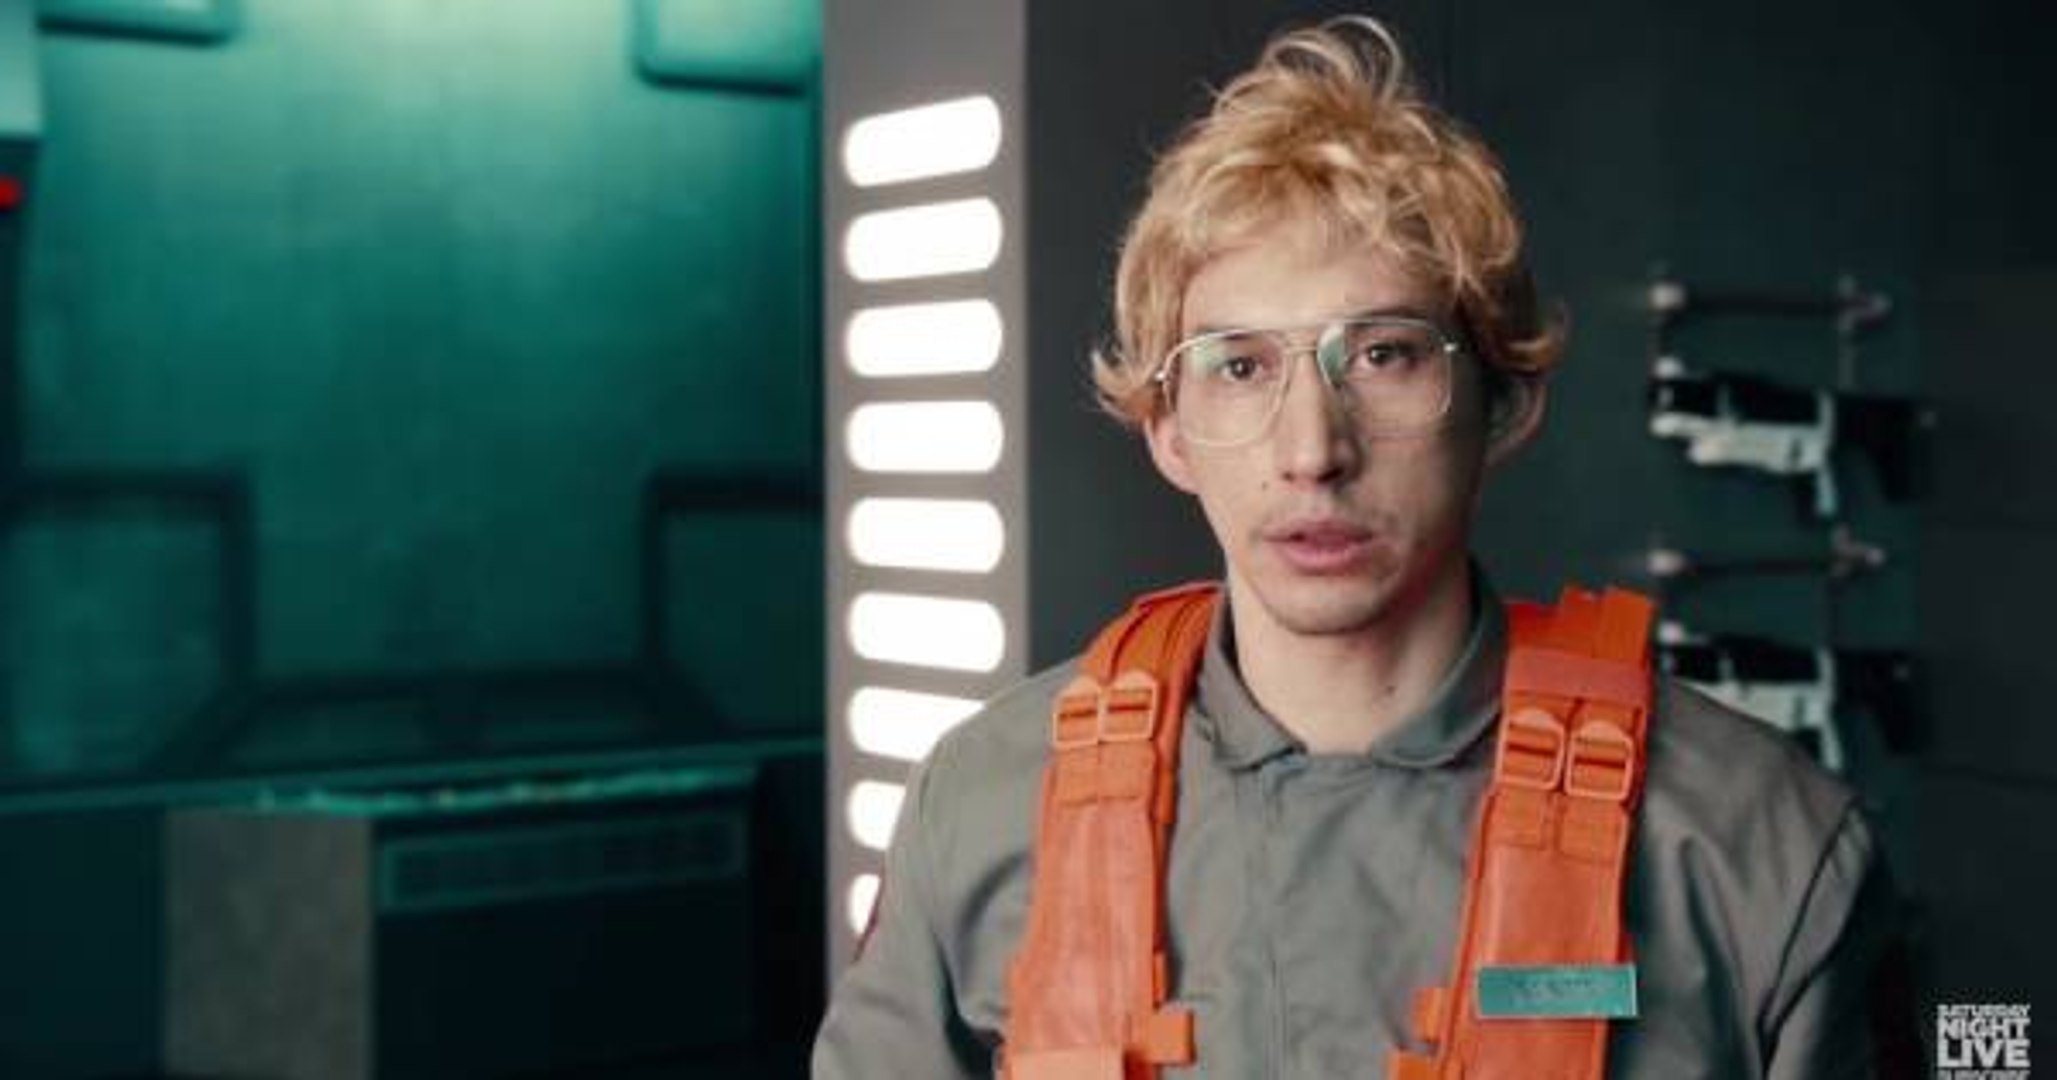 Wars : Kylo Ren in Undercover Boss. Awesome ! (VOSTF) - Vidéo Dailymotion